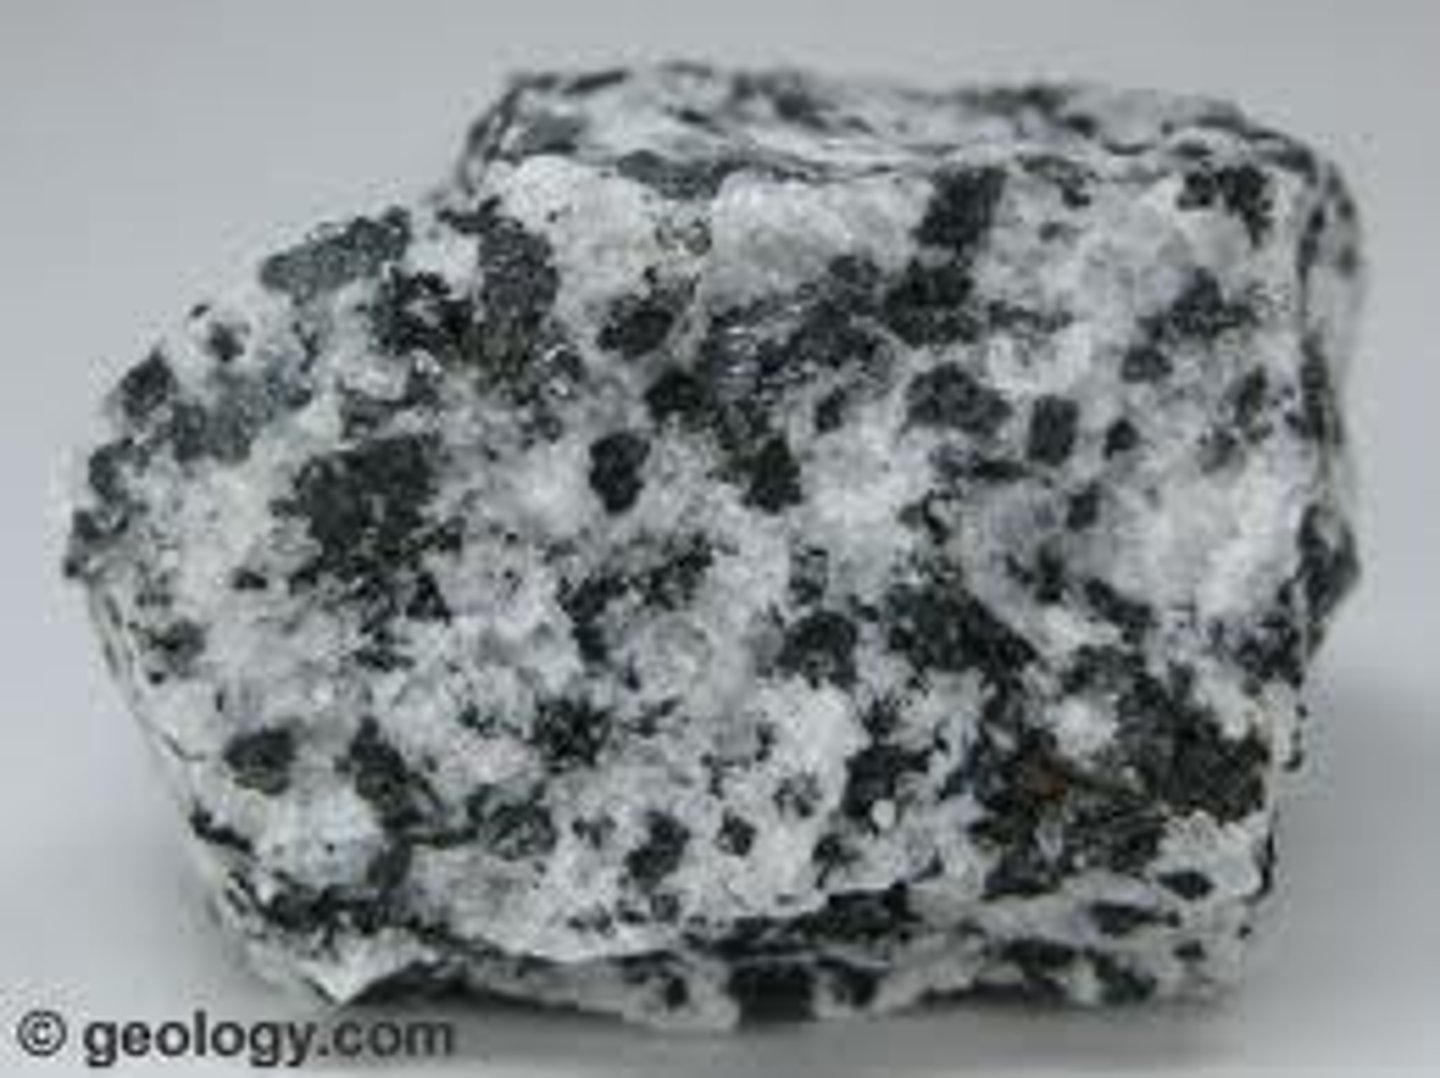 <p>Rock formed from the cooling and solidification of magma beneath Earth's surface. Coarse grained (large minerals, see image), and long cooling time.</p>